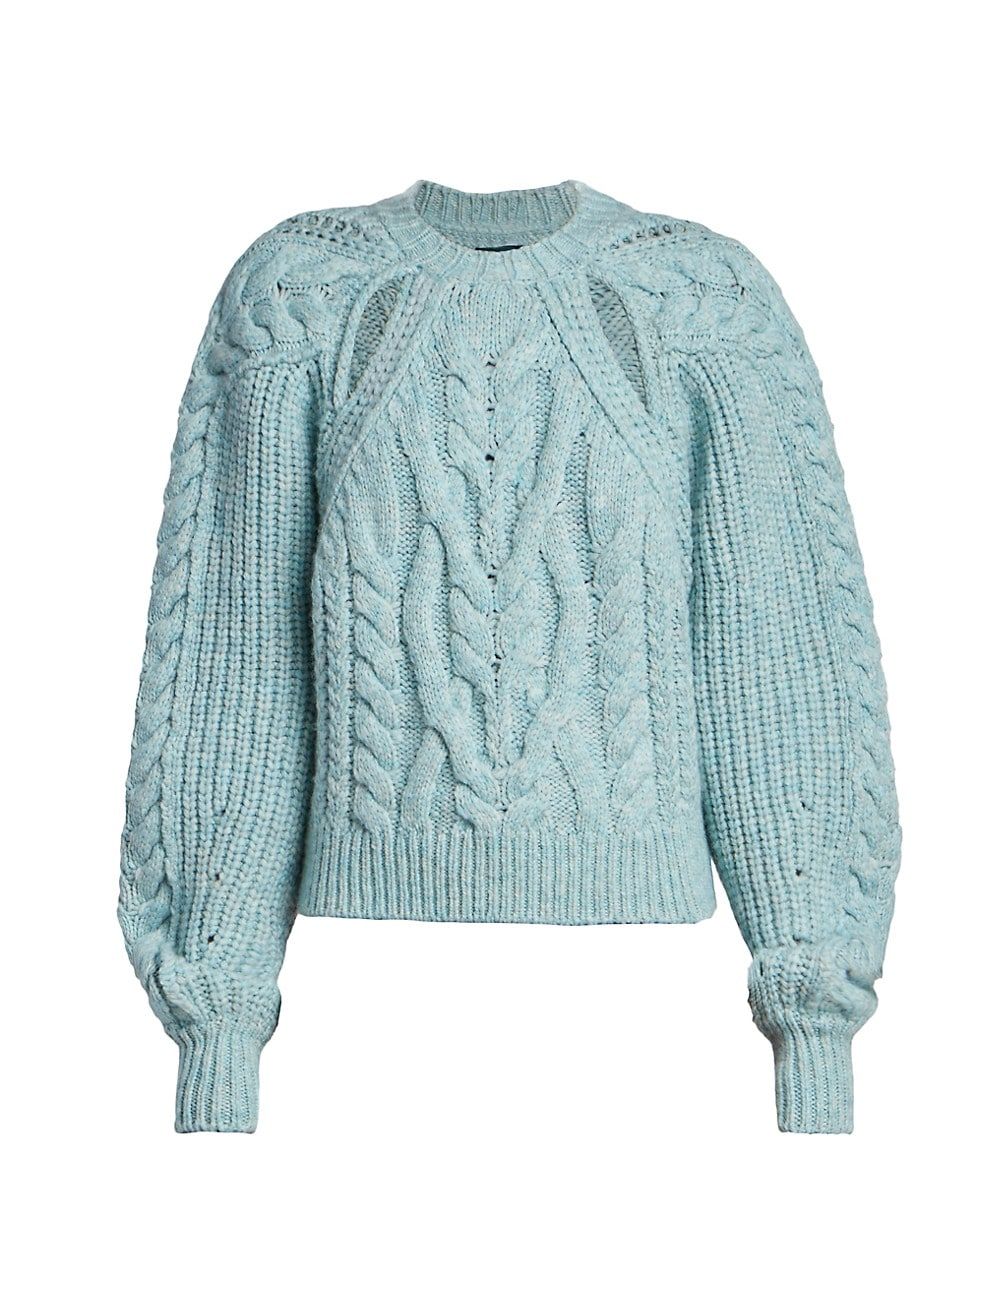 Isabel Marant Paloma Cut-Out Cable-Knit Sweater | Saks Fifth Avenue